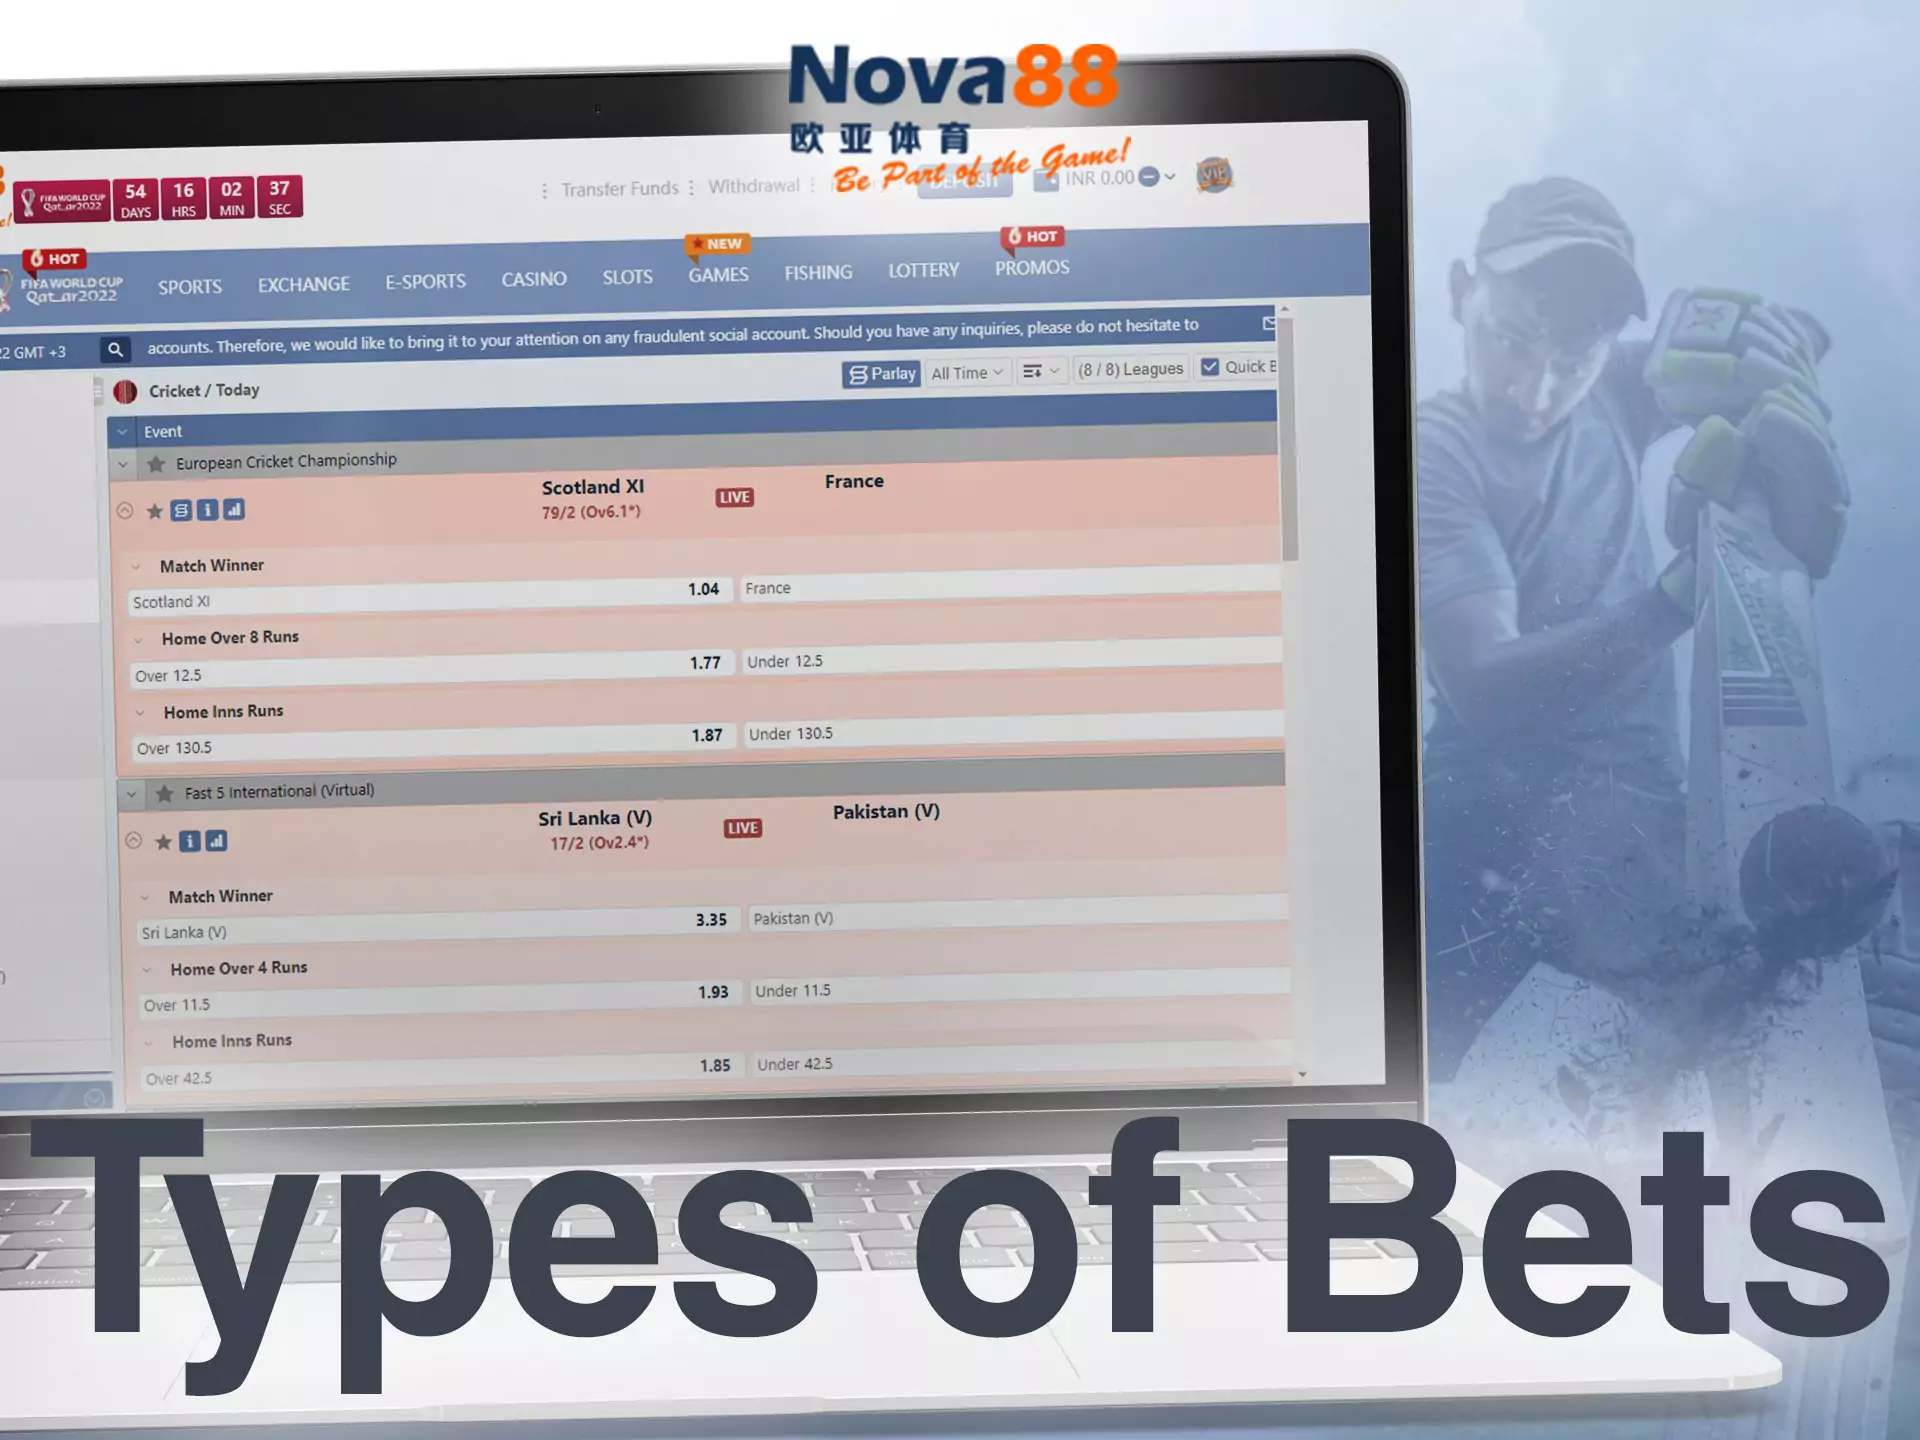 On the Nova88 website, you can place different types of bets.